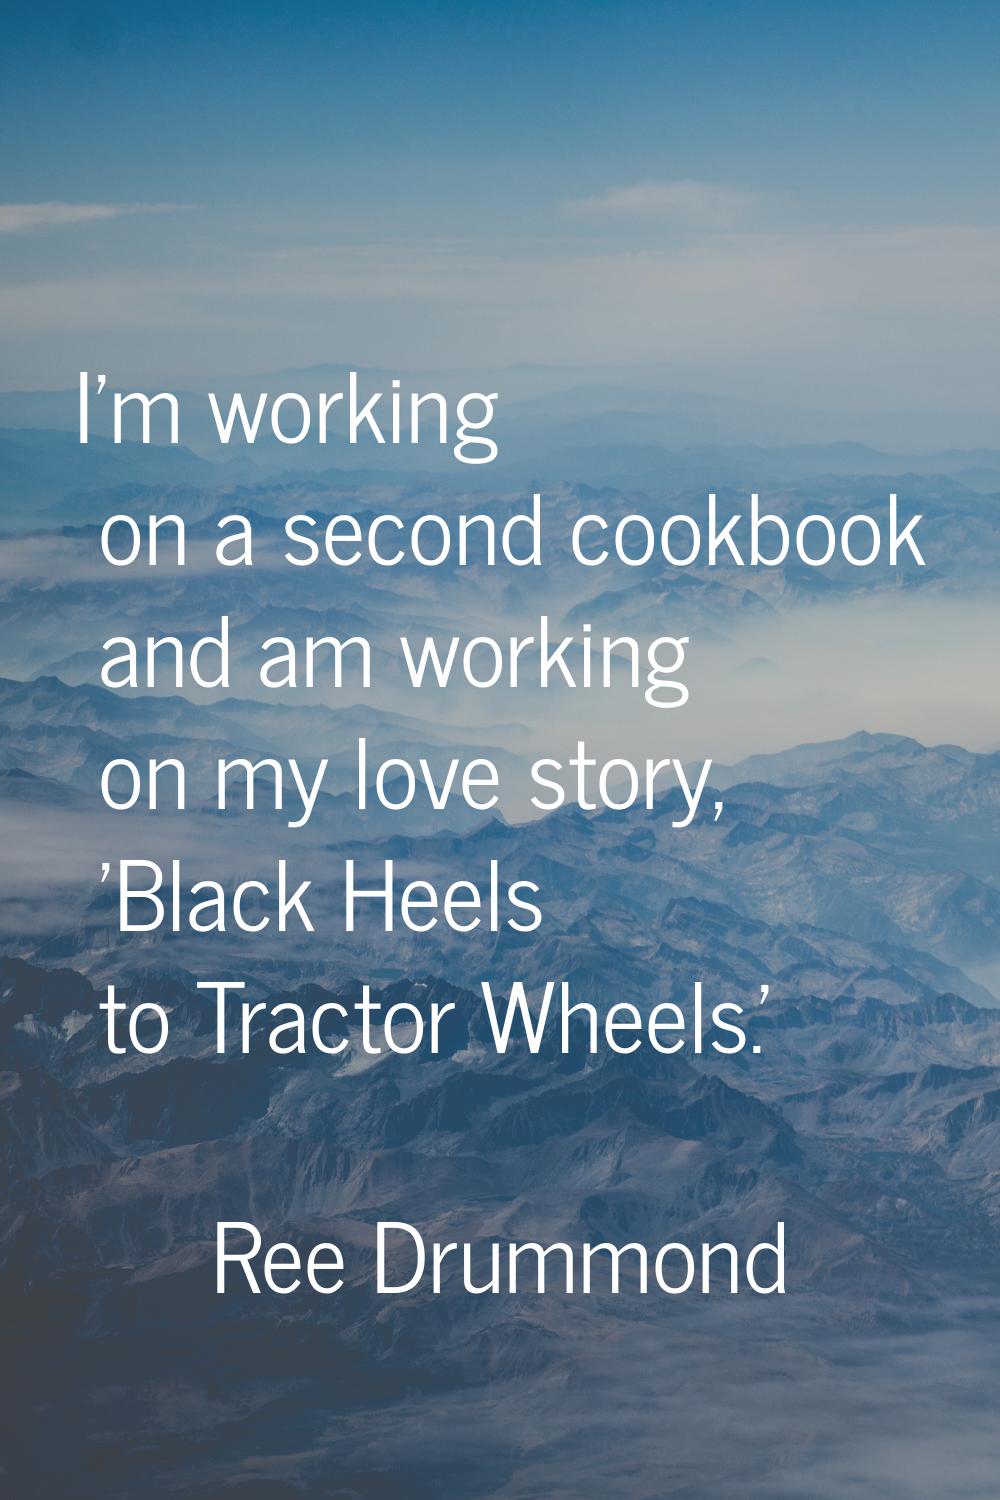 I'm working on a second cookbook and am working on my love story, 'Black Heels to Tractor Wheels.'